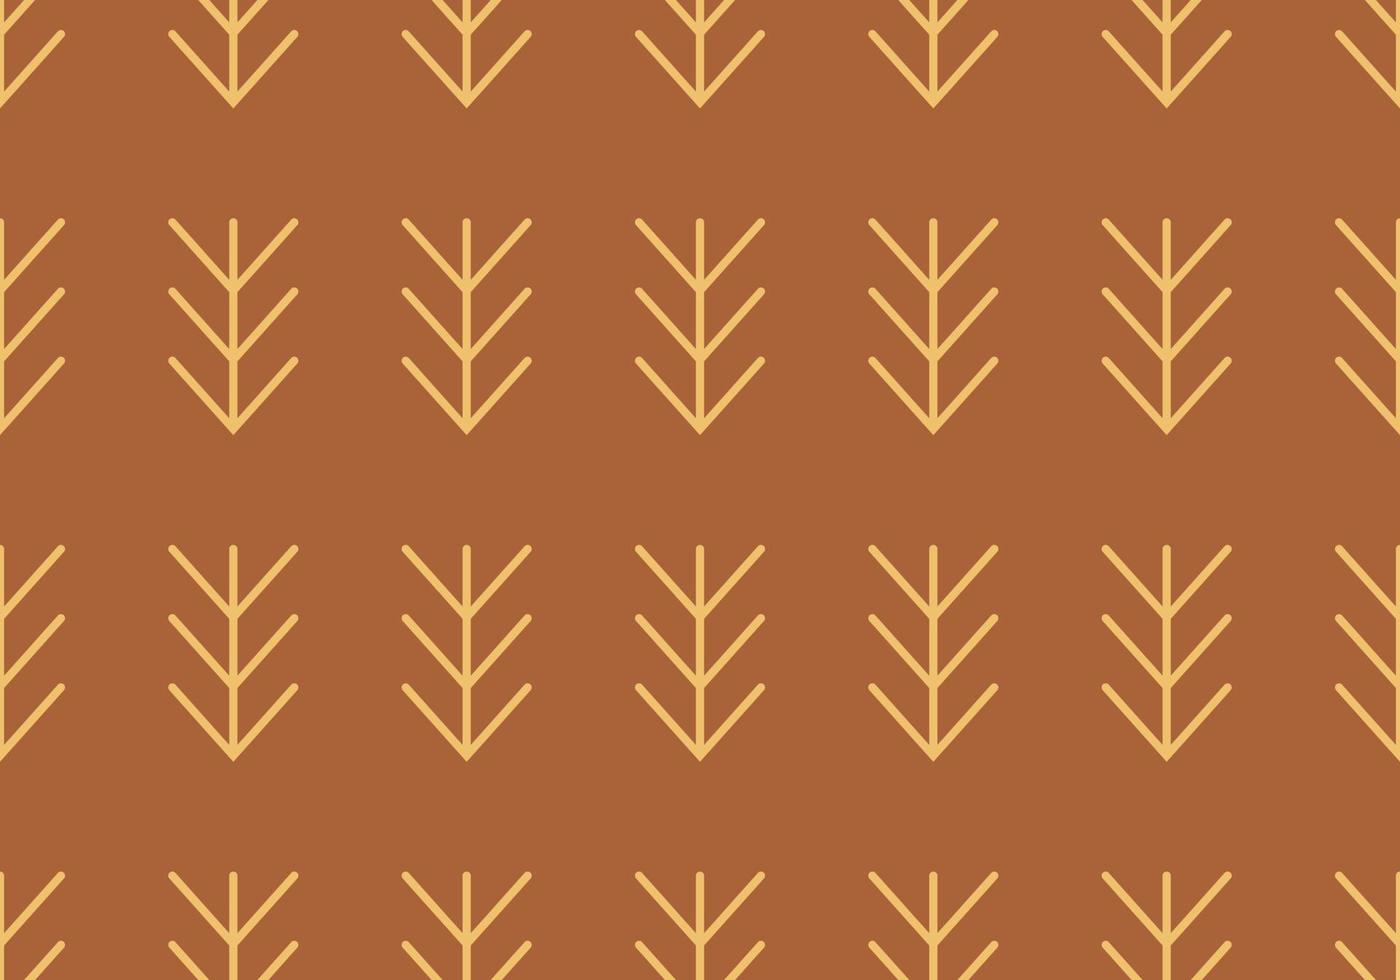 Botanical seamless pattern with leaves. Floral abstract print design for wallpaper, wrap paper or fabric. Vector hand drawn background. Hawaiian style, autumn style, beach style.